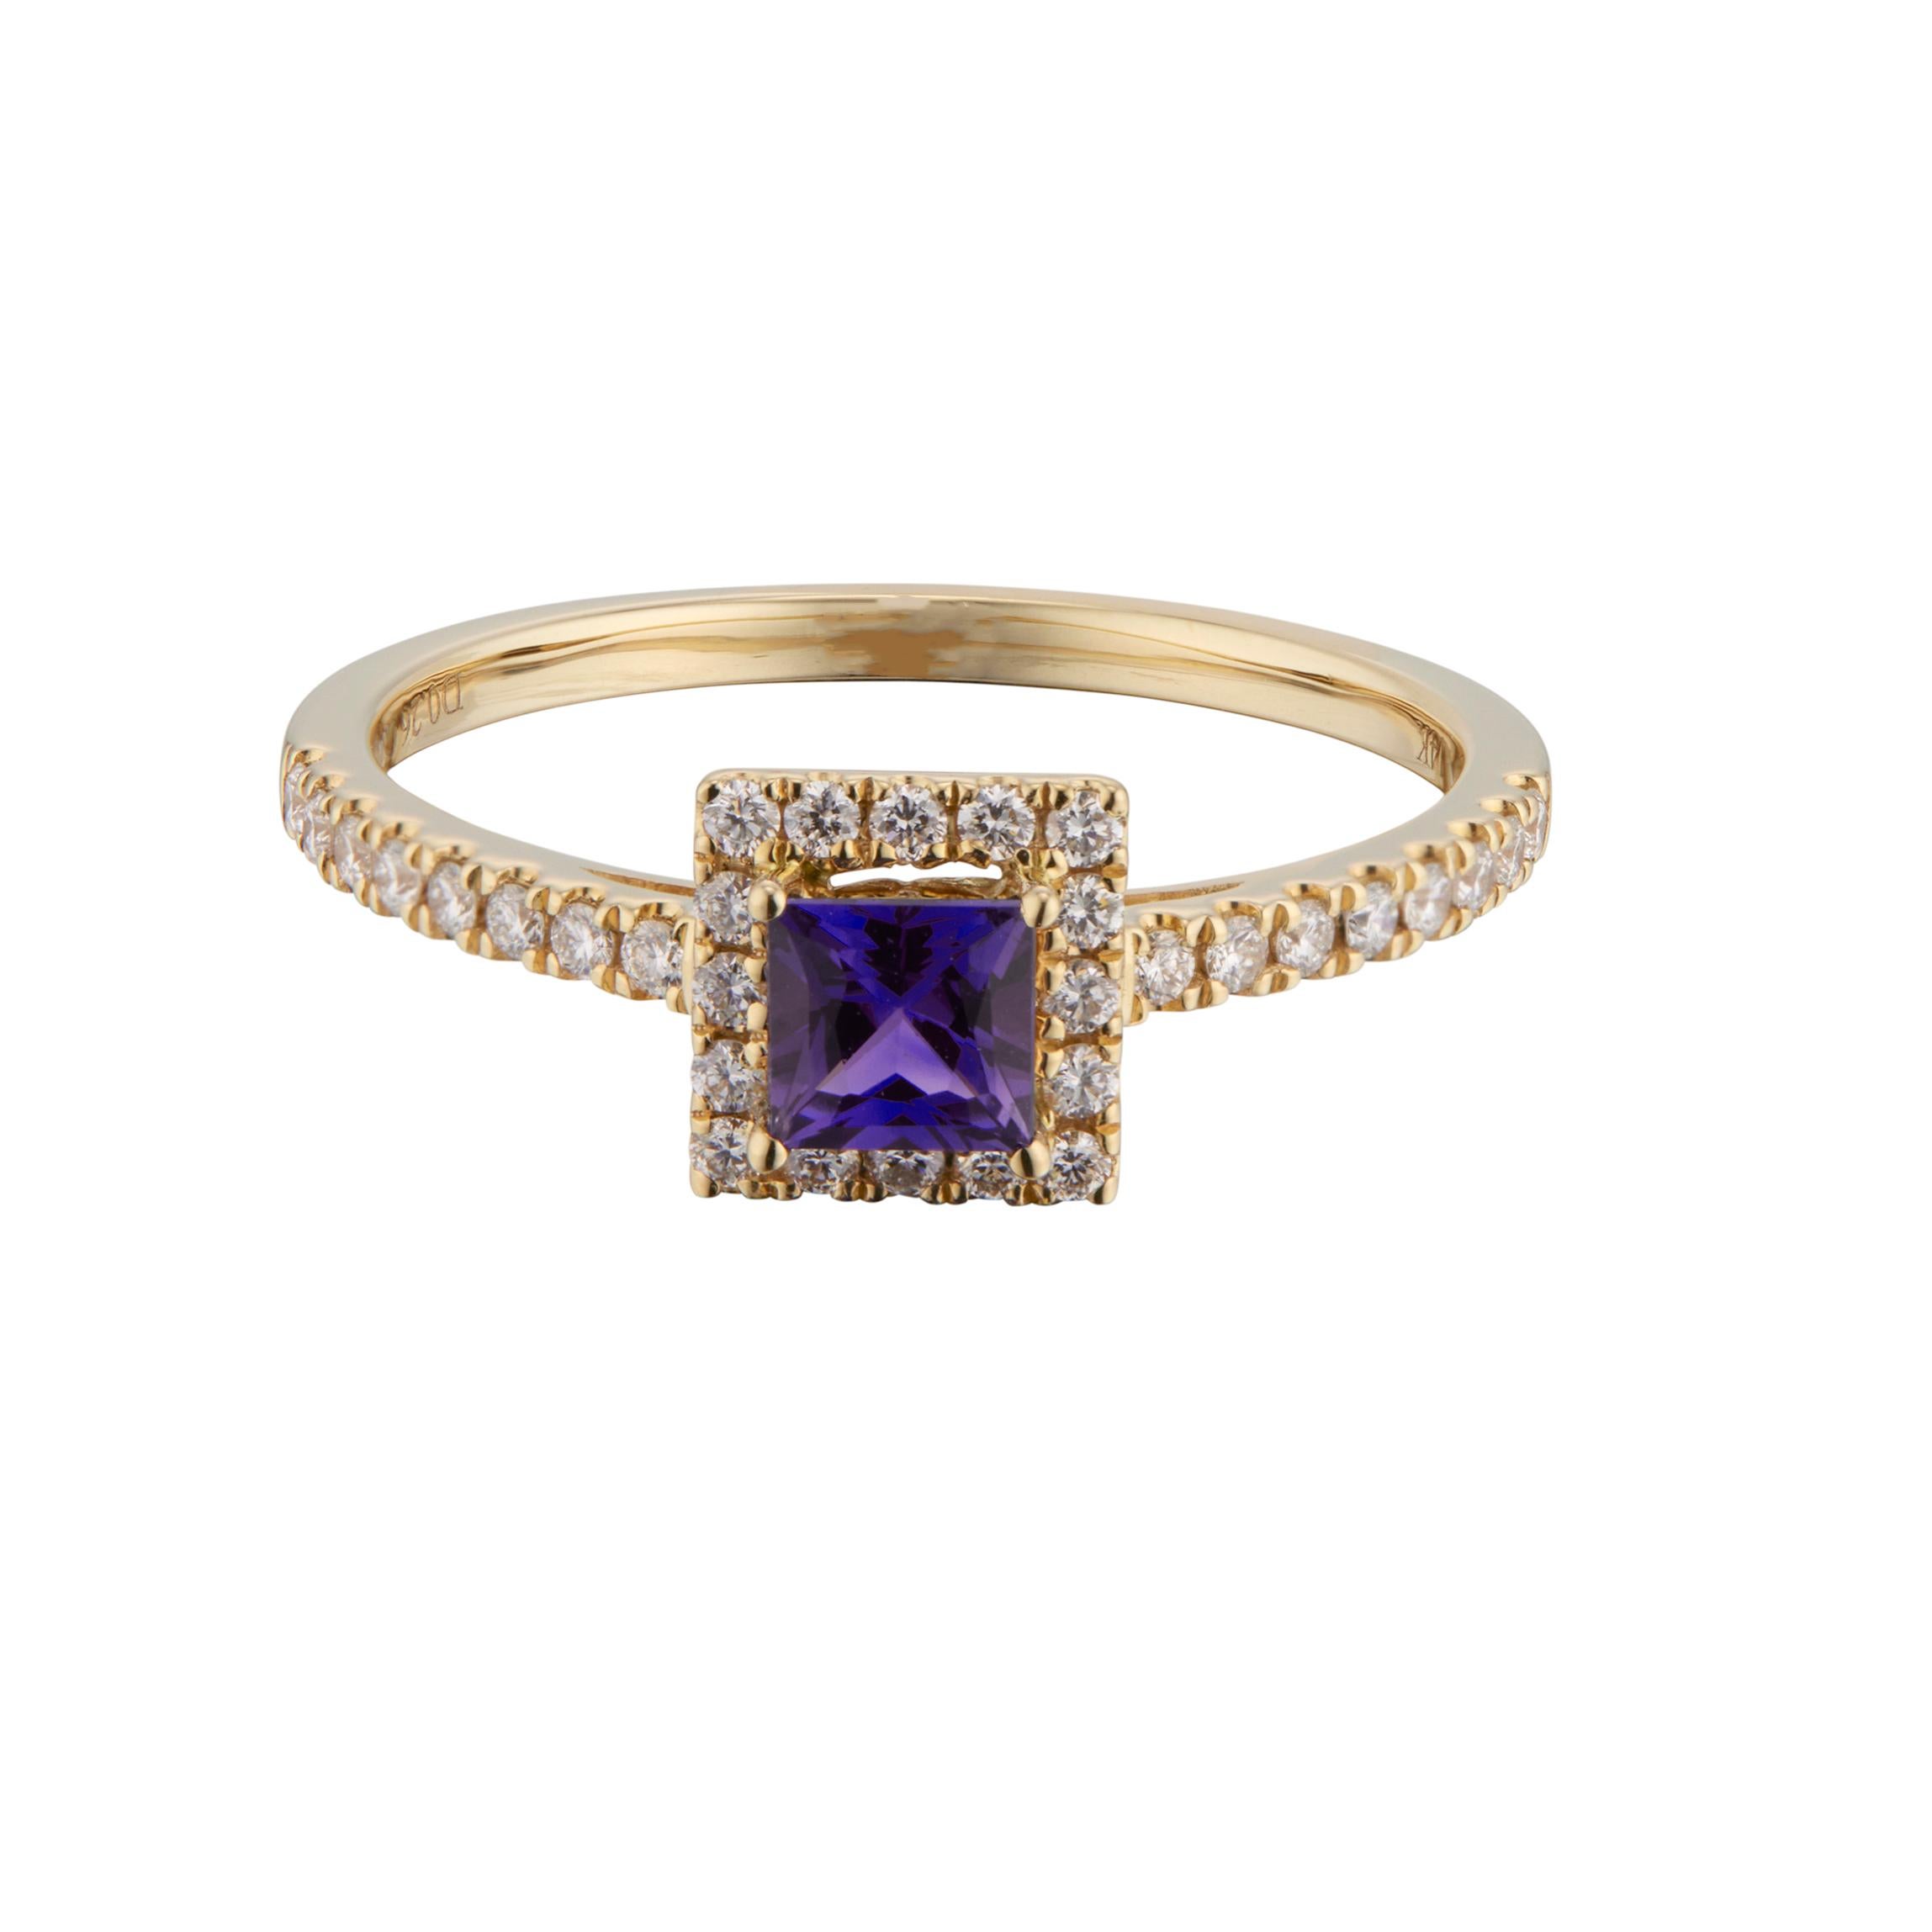 Sapphire and diamond engagement ring. 1 square purple and blue center sapphire, in a 14k yellow gold setting with a square halo of round cut diamonds, accented by round cut diamonds along both sides of the shank. 

1 purple square cut sapphire,